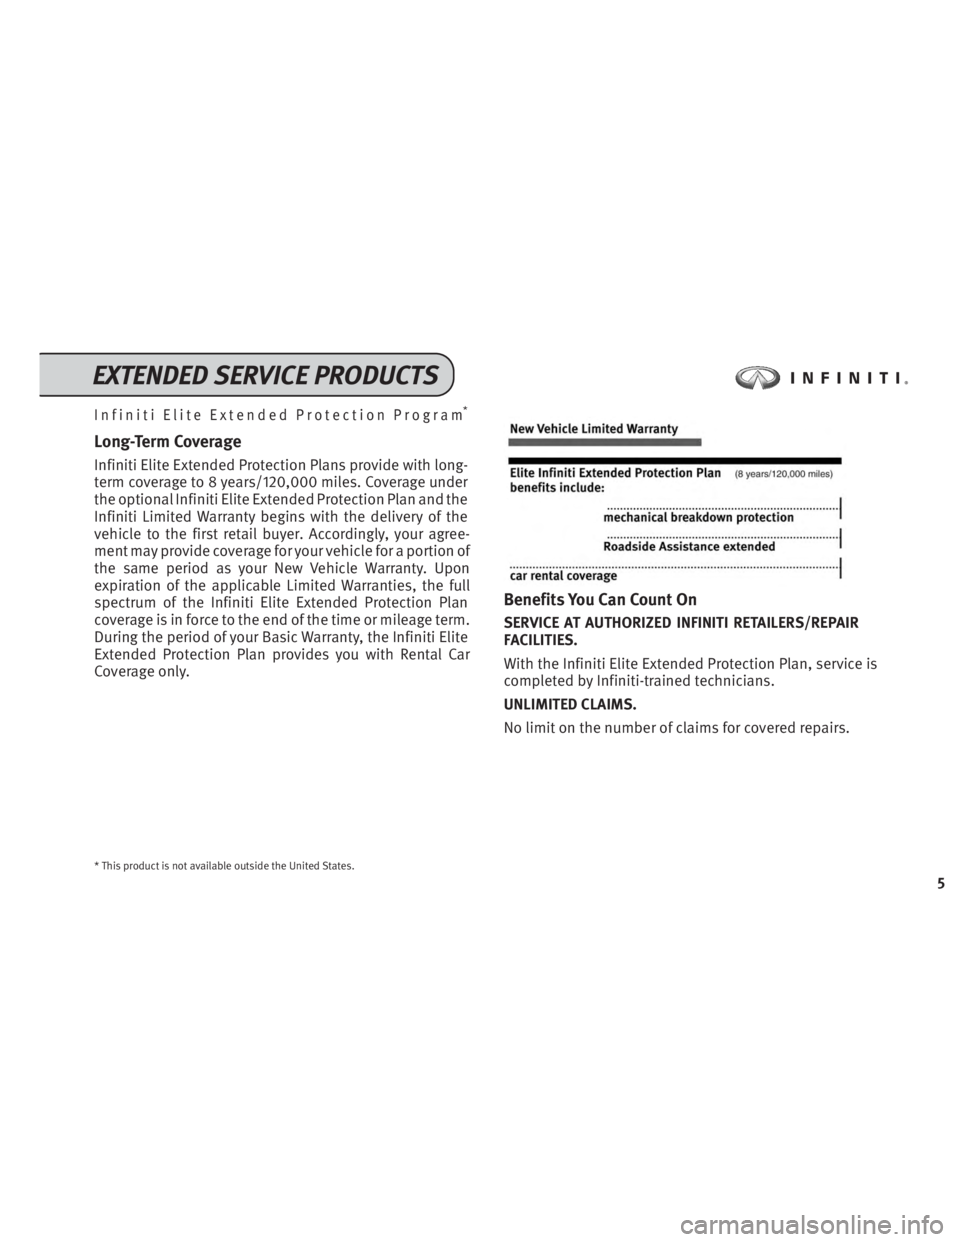 INFINITI Q50 2014  Service And Maintenance Guide Infiniti Elite Extended Protection Program*
Long-Term Coverage
Infiniti Elite Extended Protection Plans provide with long-
term coverage to 8 years/120,000 miles. Coverage under
the optional Infiniti 